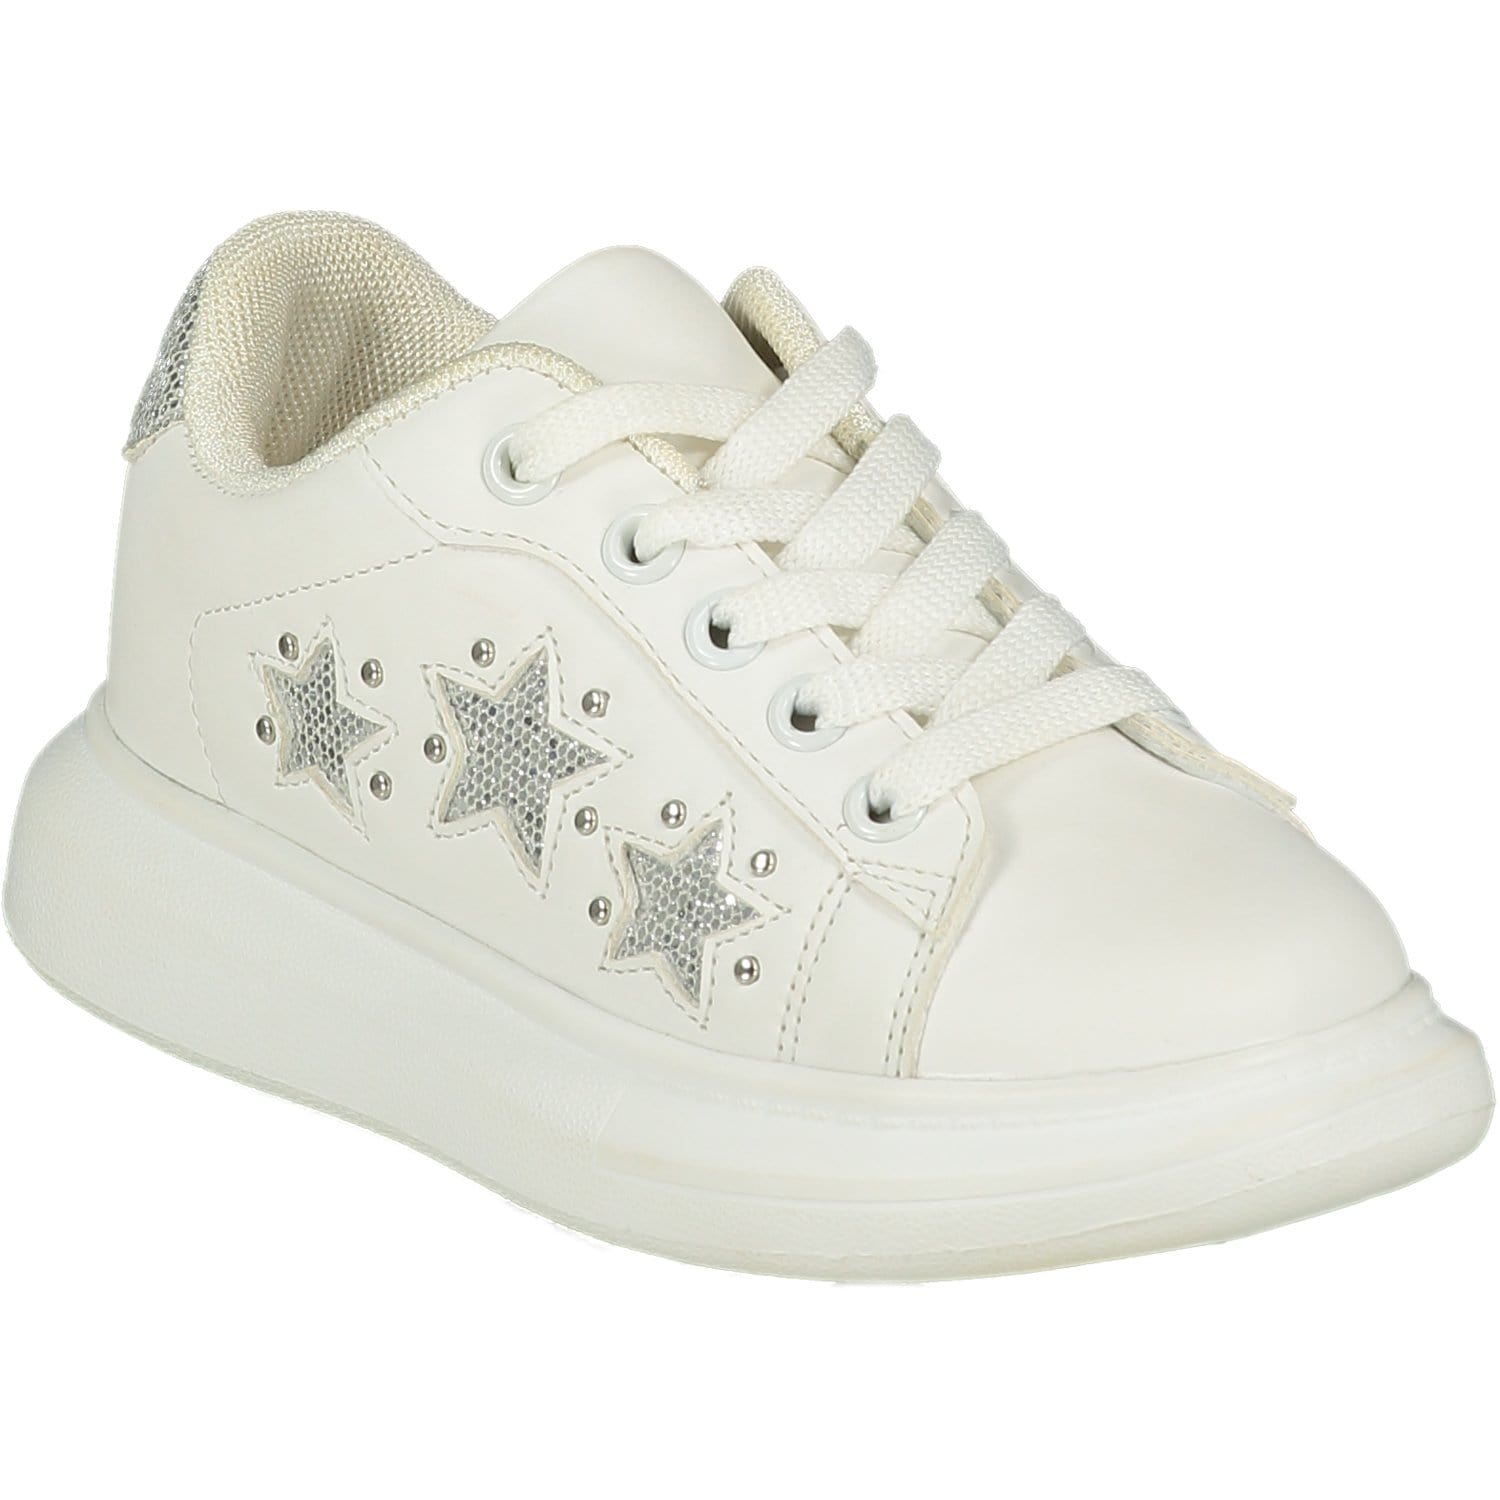 A DEE - Queeny Chunky Star Trainer - White